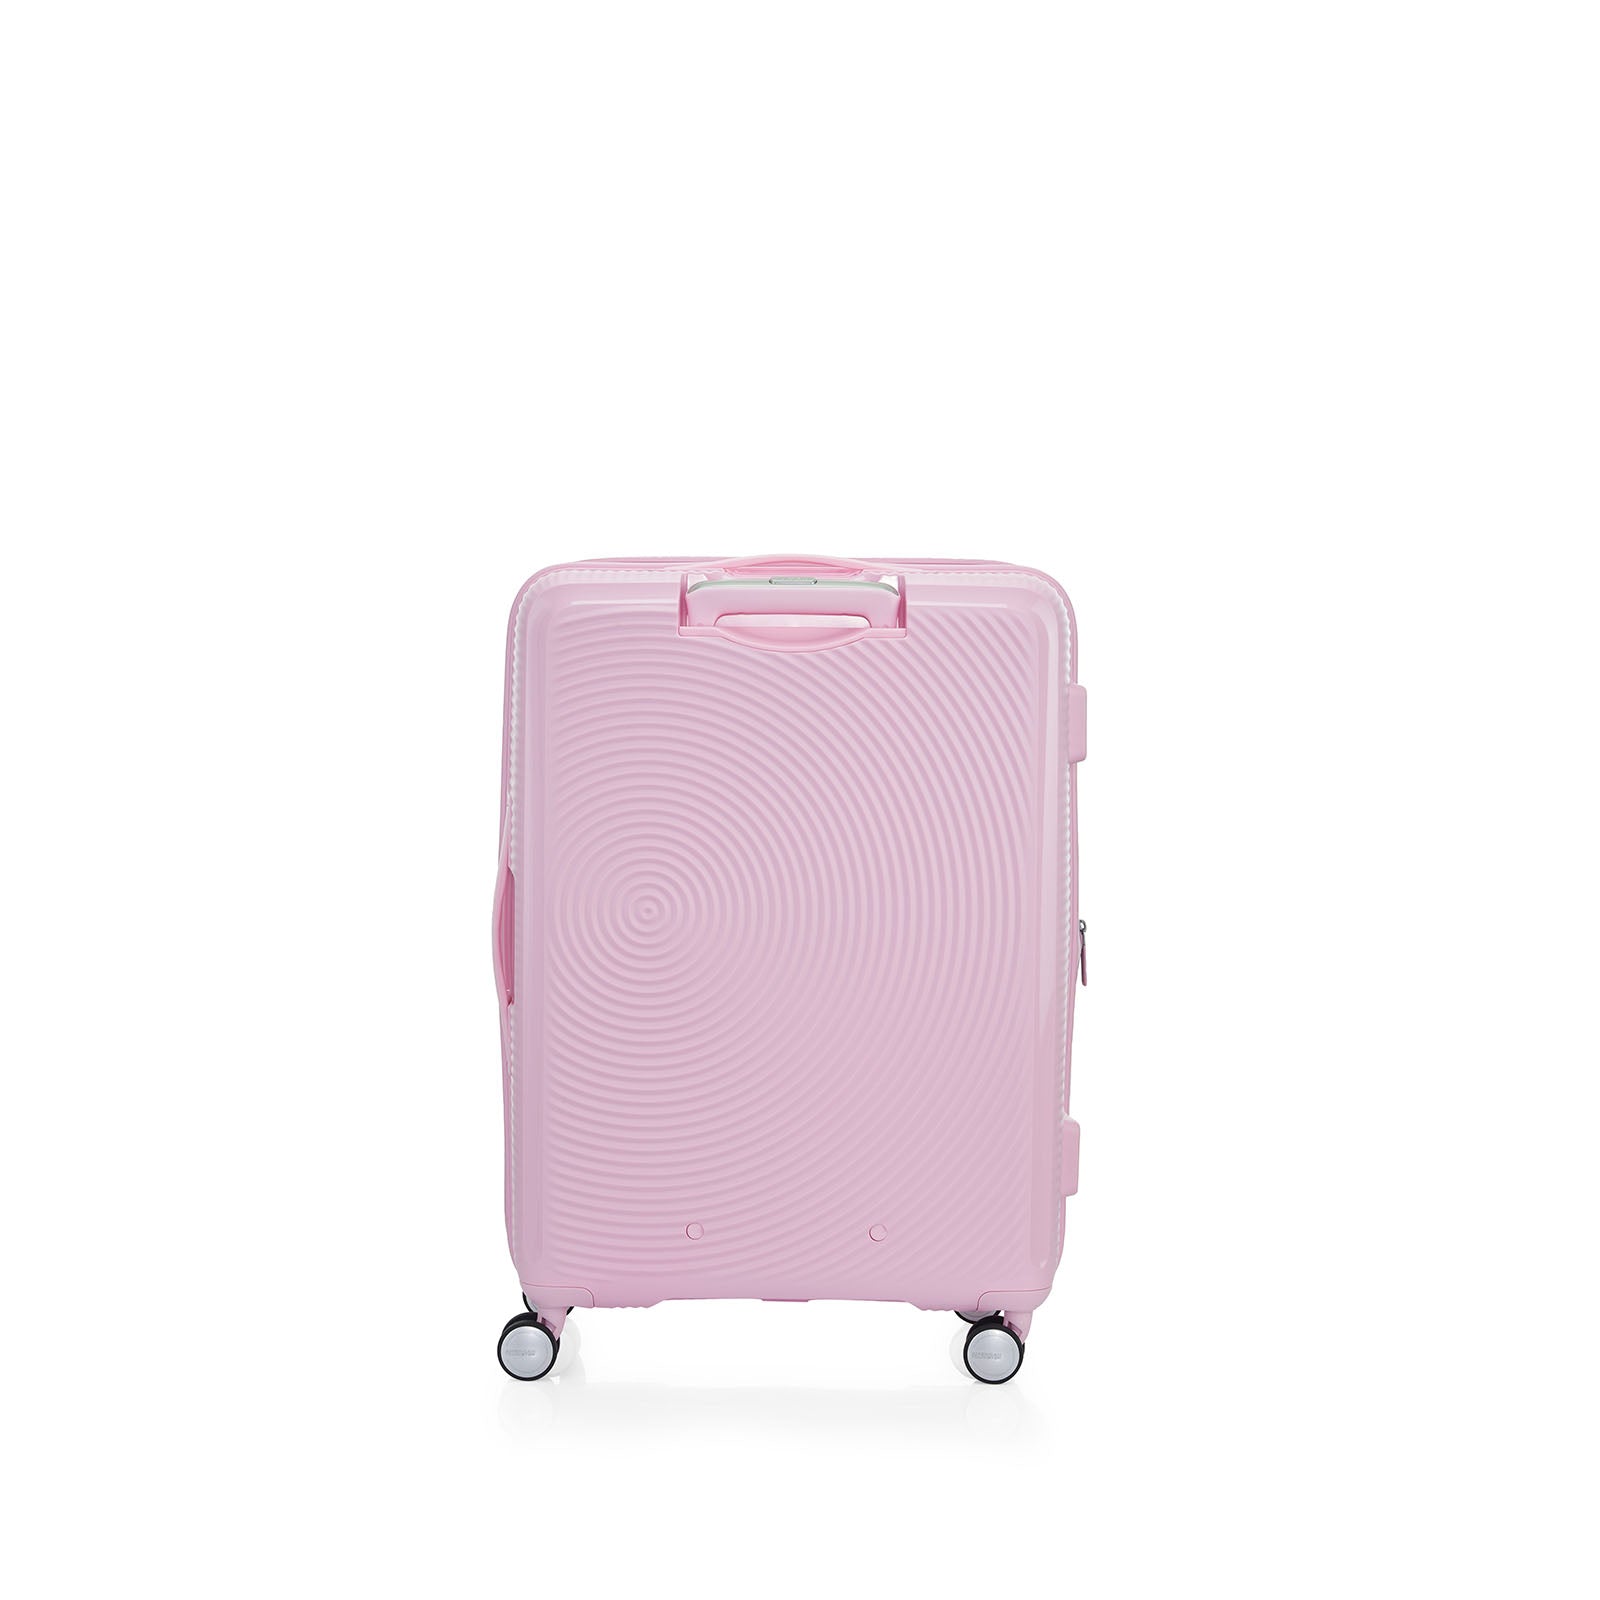 American-Tourister-Curio-2-69cm-Suitcase-Fresh-Pink-Back